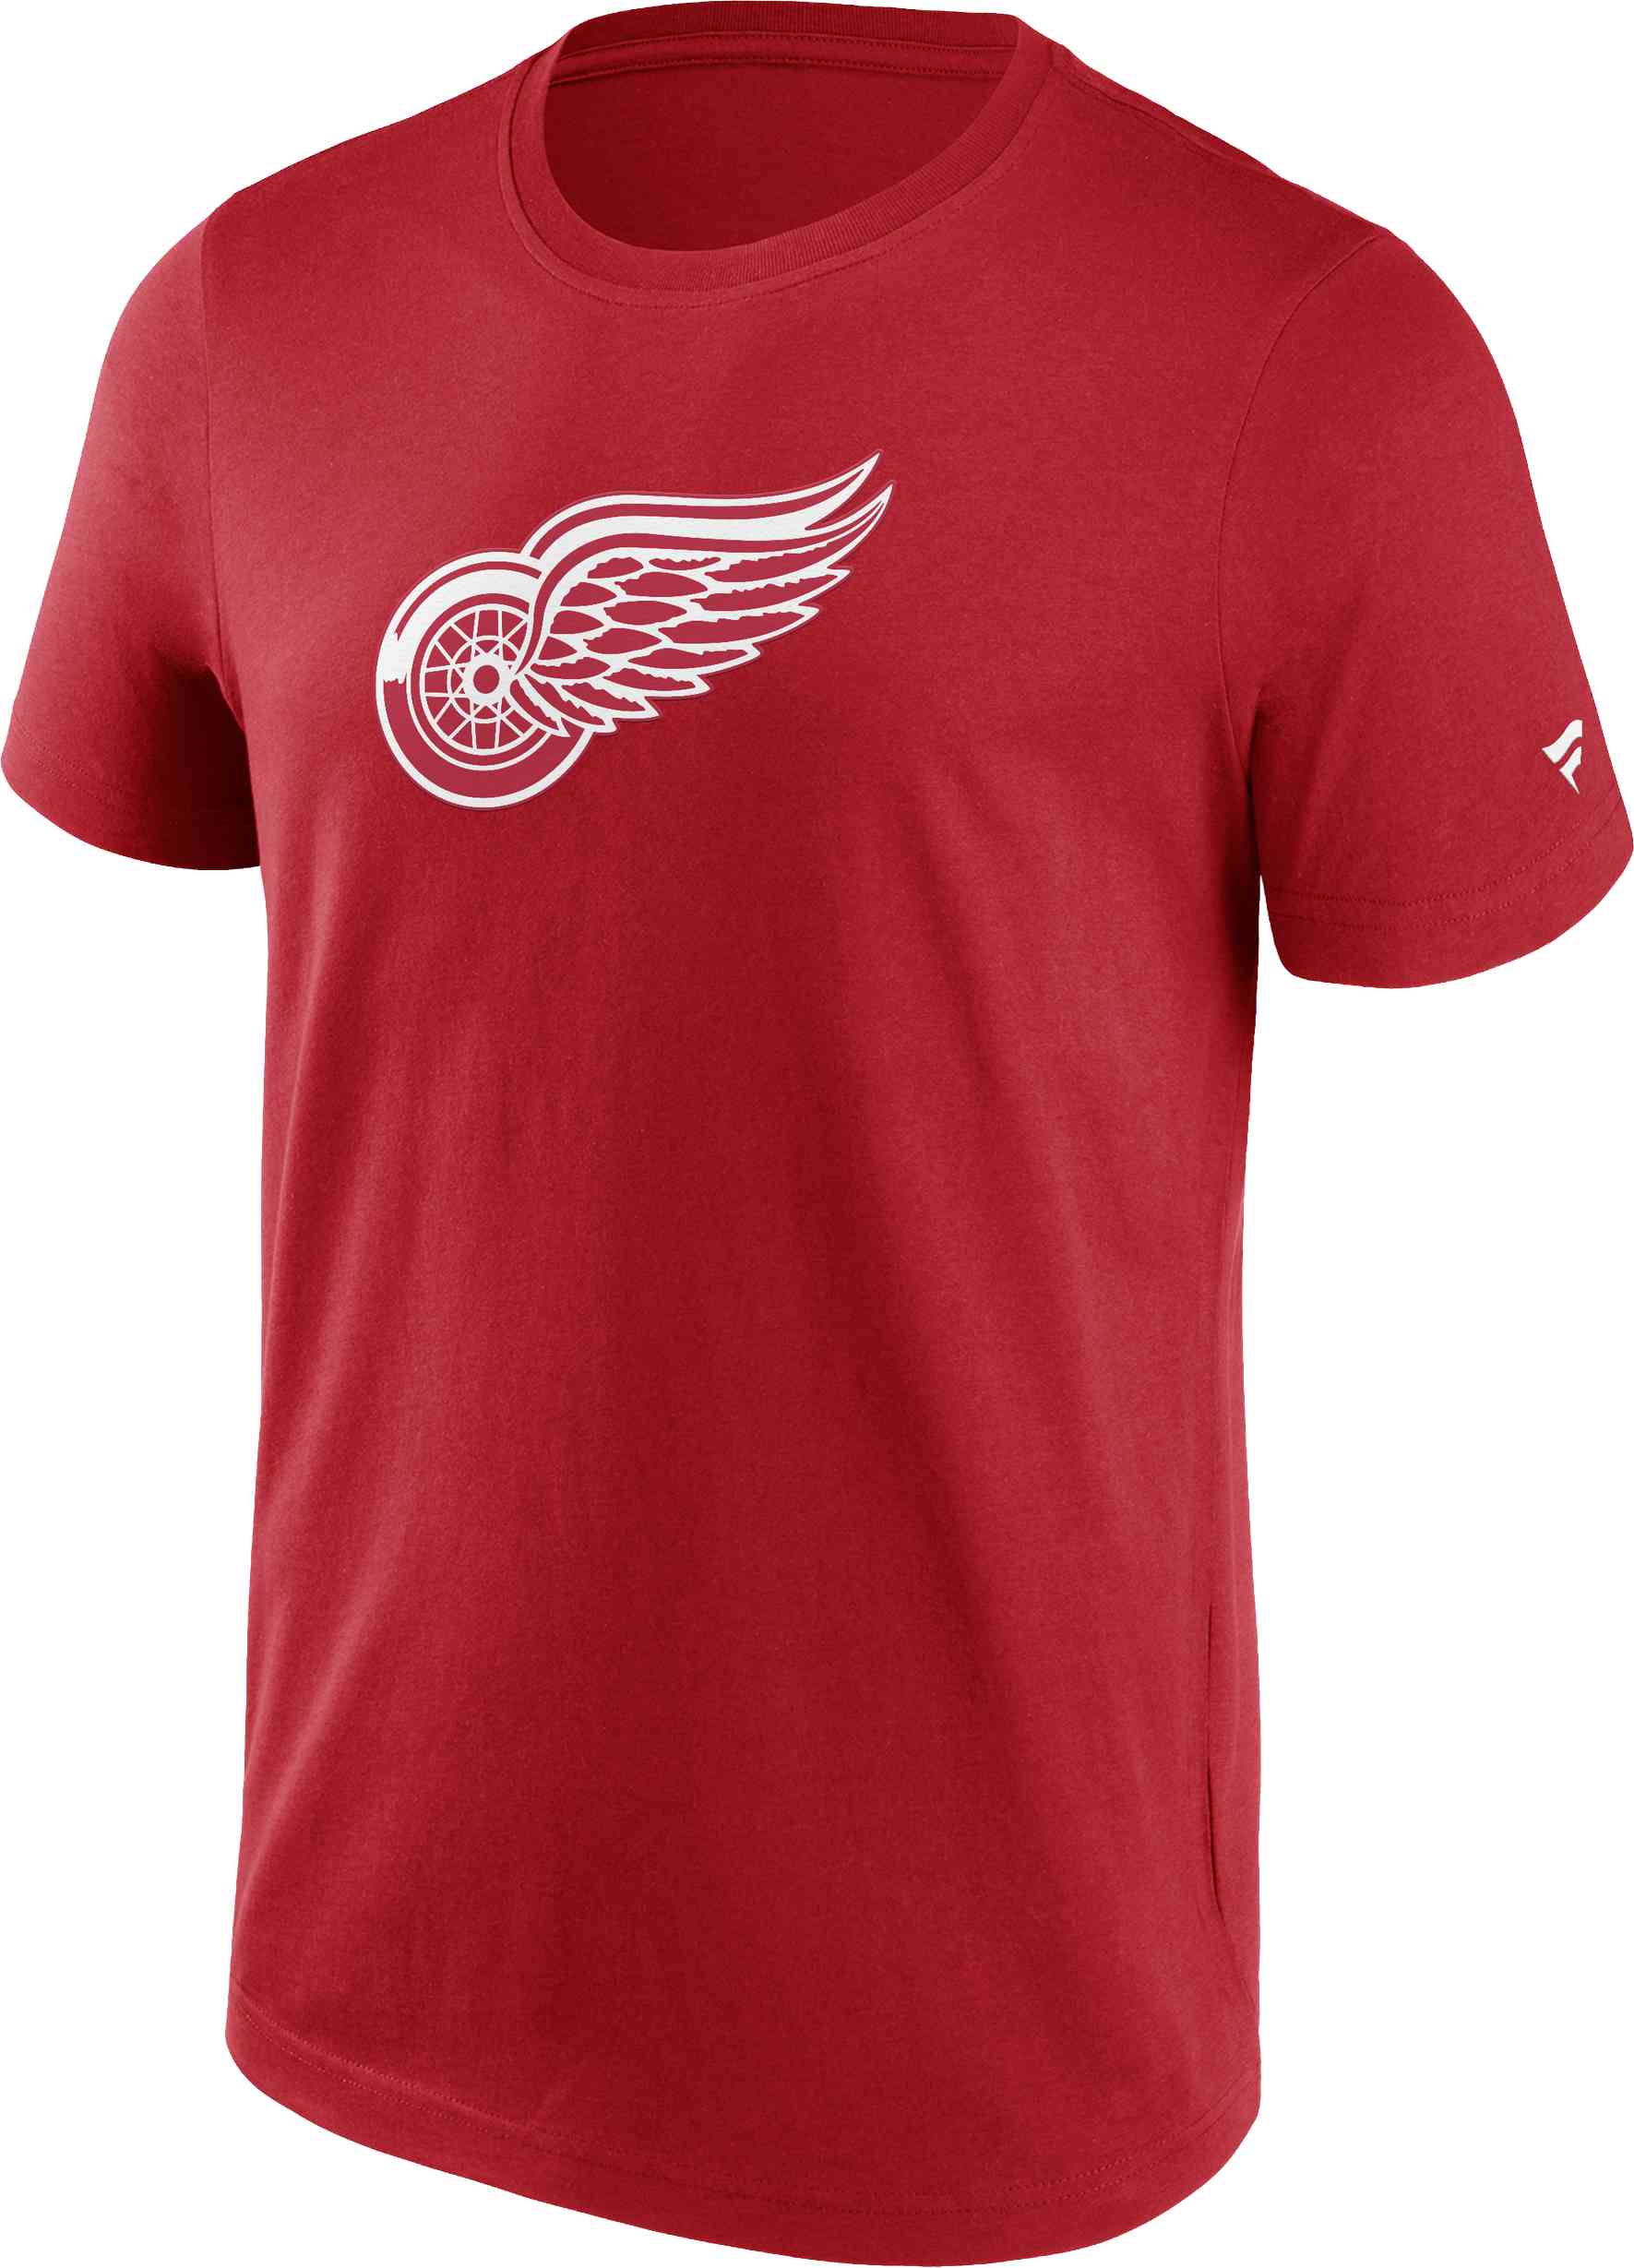 Fanatics - NHL Detroit Red Wings Primary Logo Graphic T-Shirt